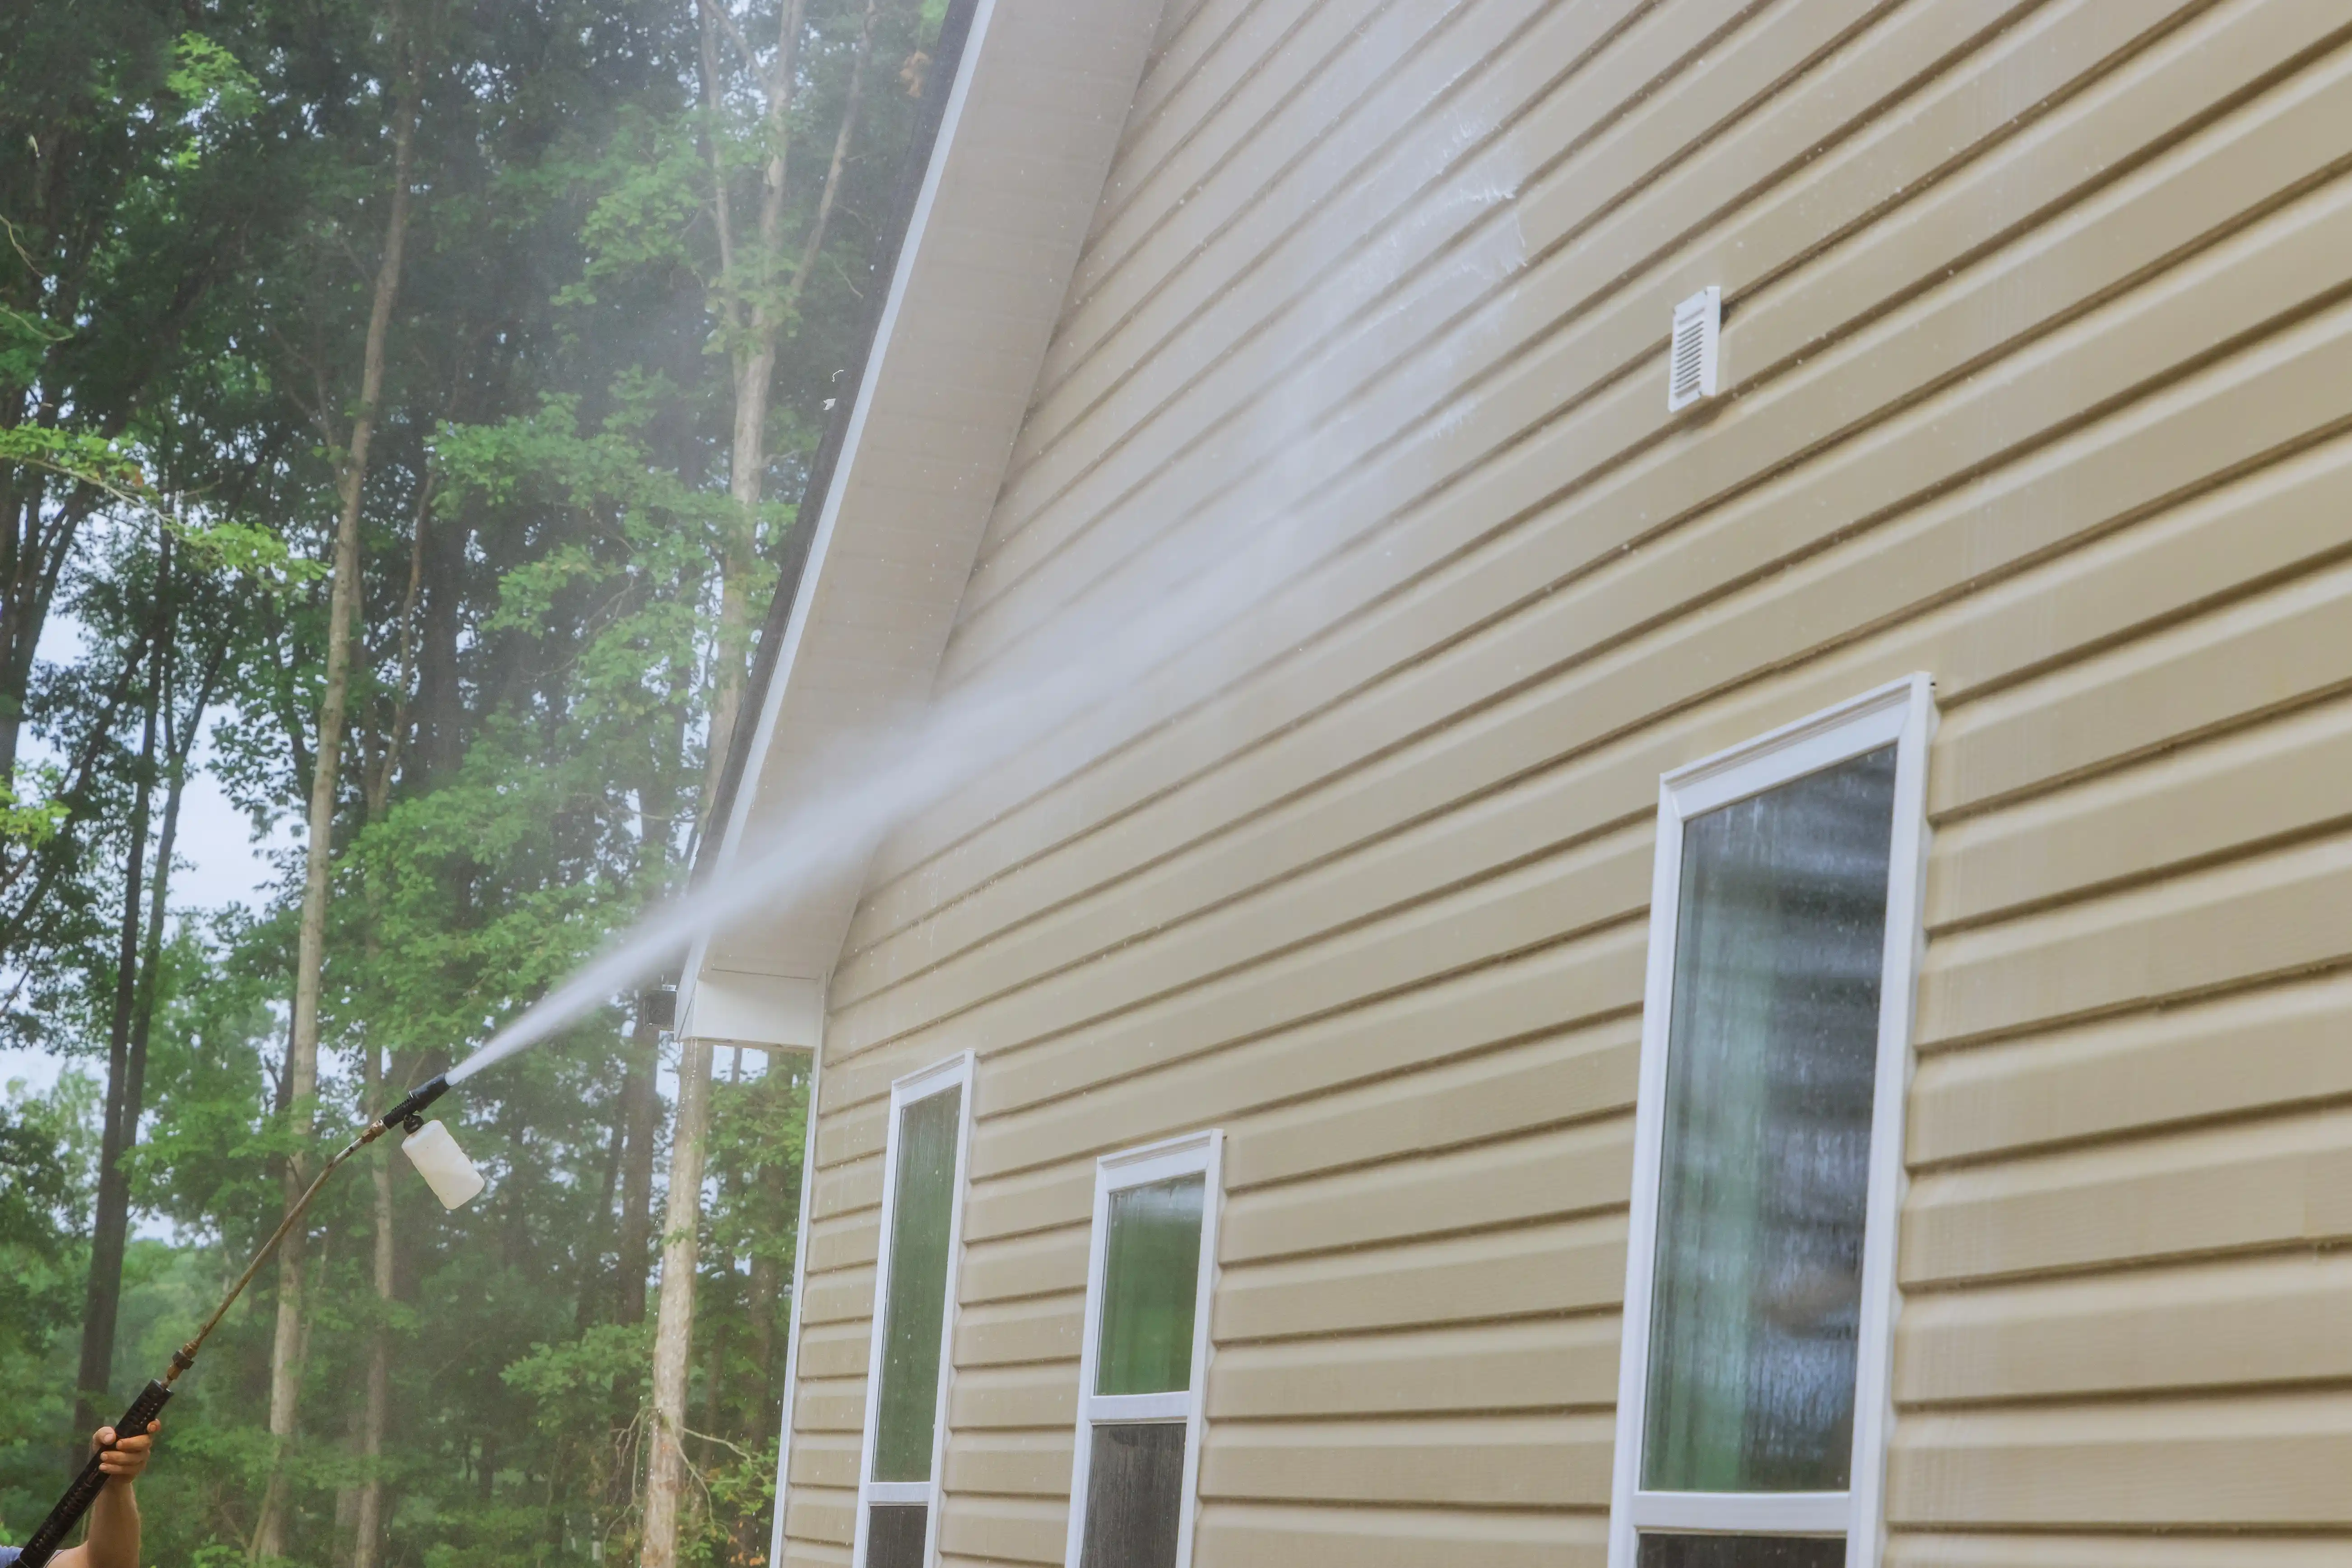 How to Use a Pressure Washer Correctly and Safely